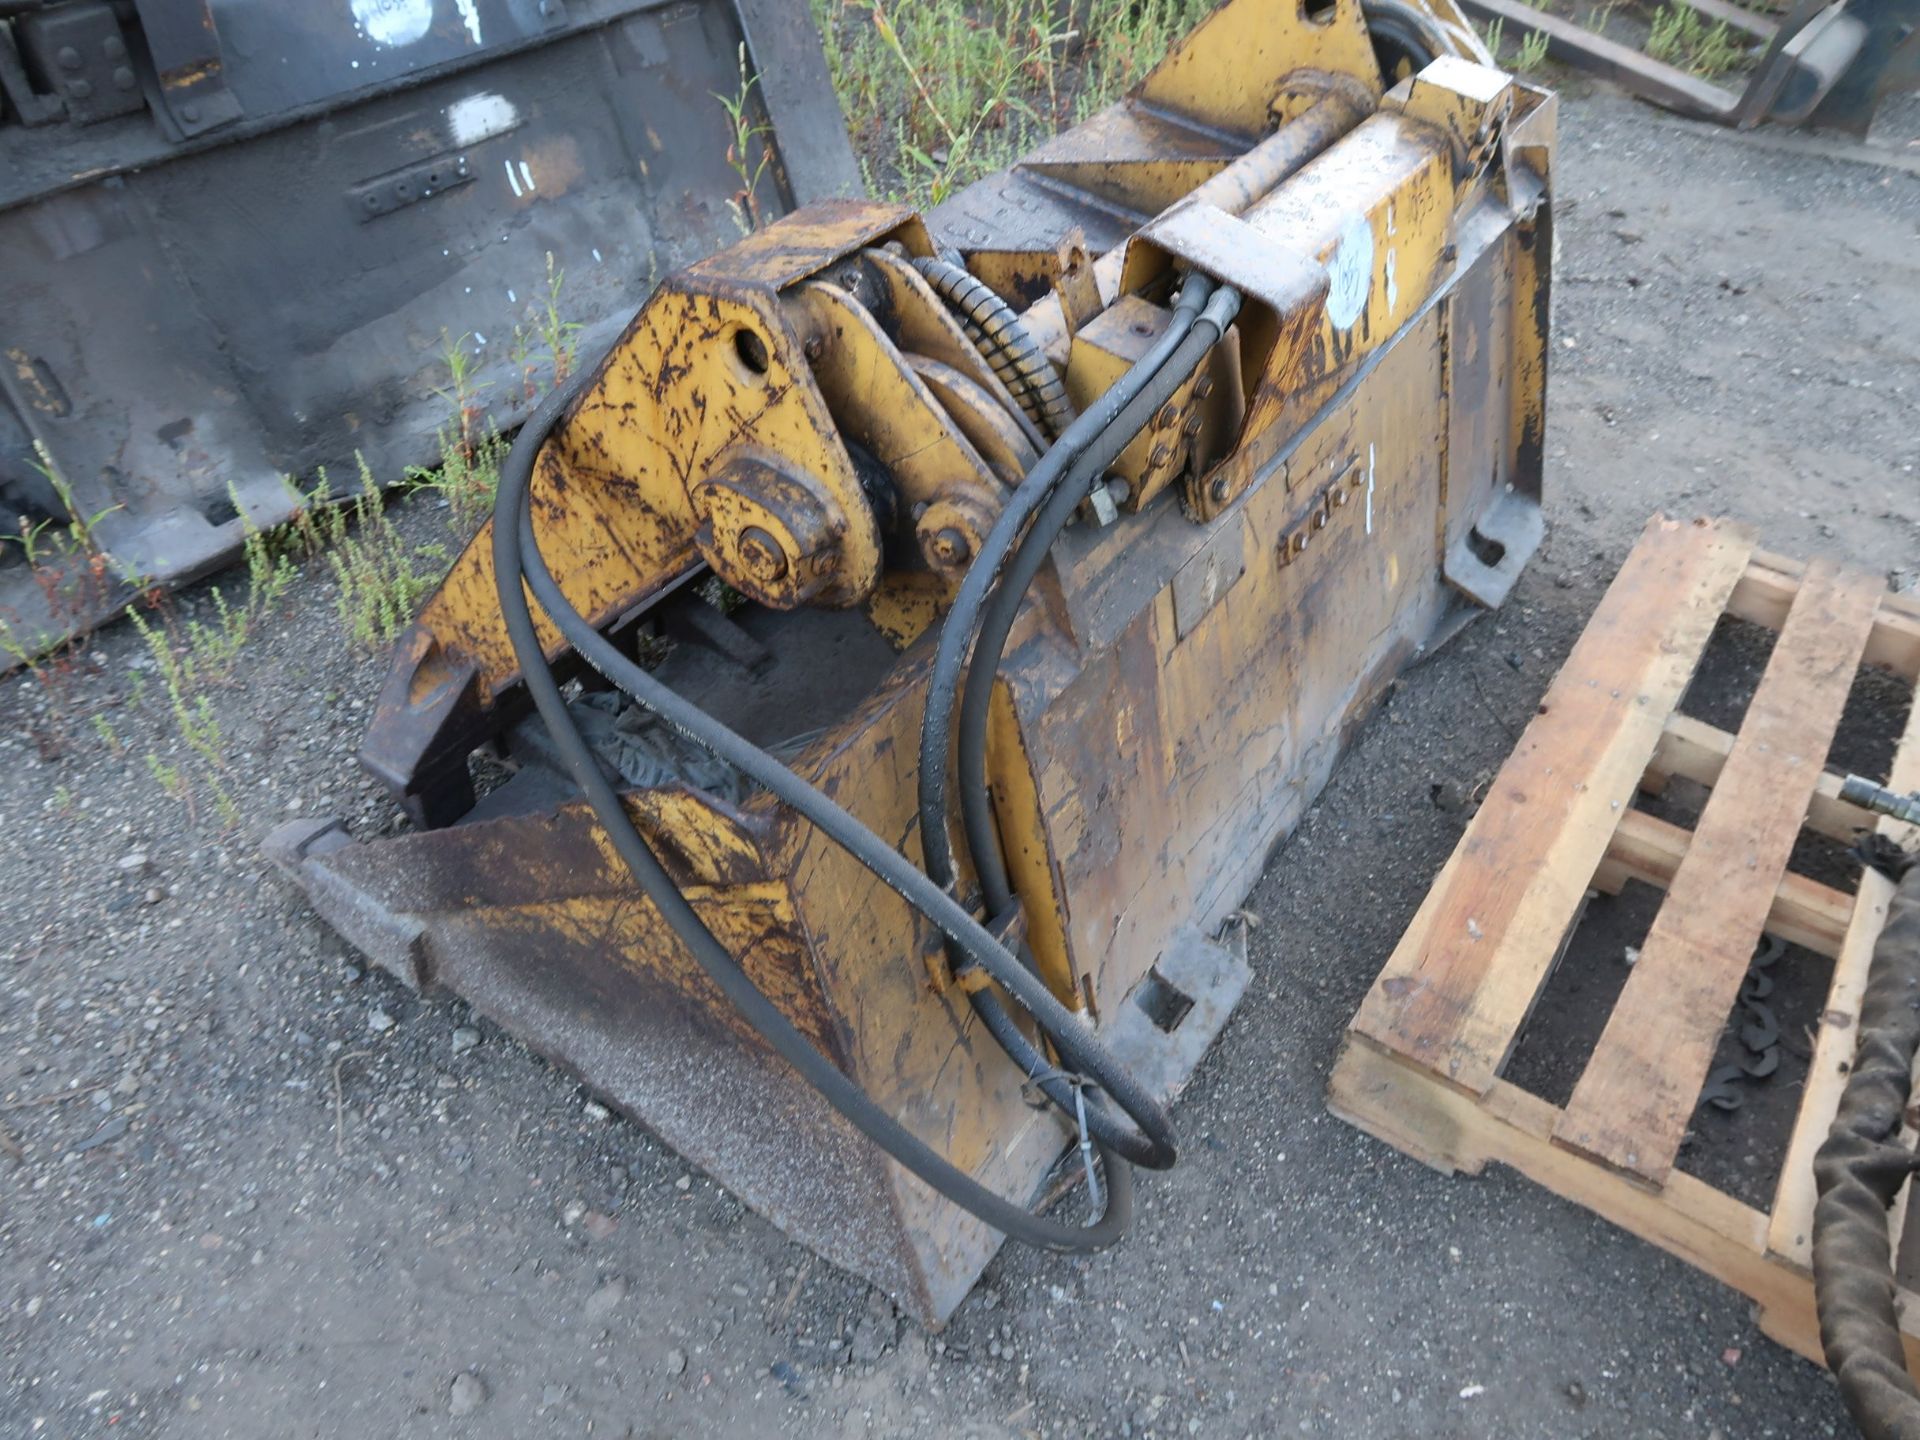 62" ALLIED GATOR MODEL 1581A SKID STEER BUCKET WITH GRAPPLE